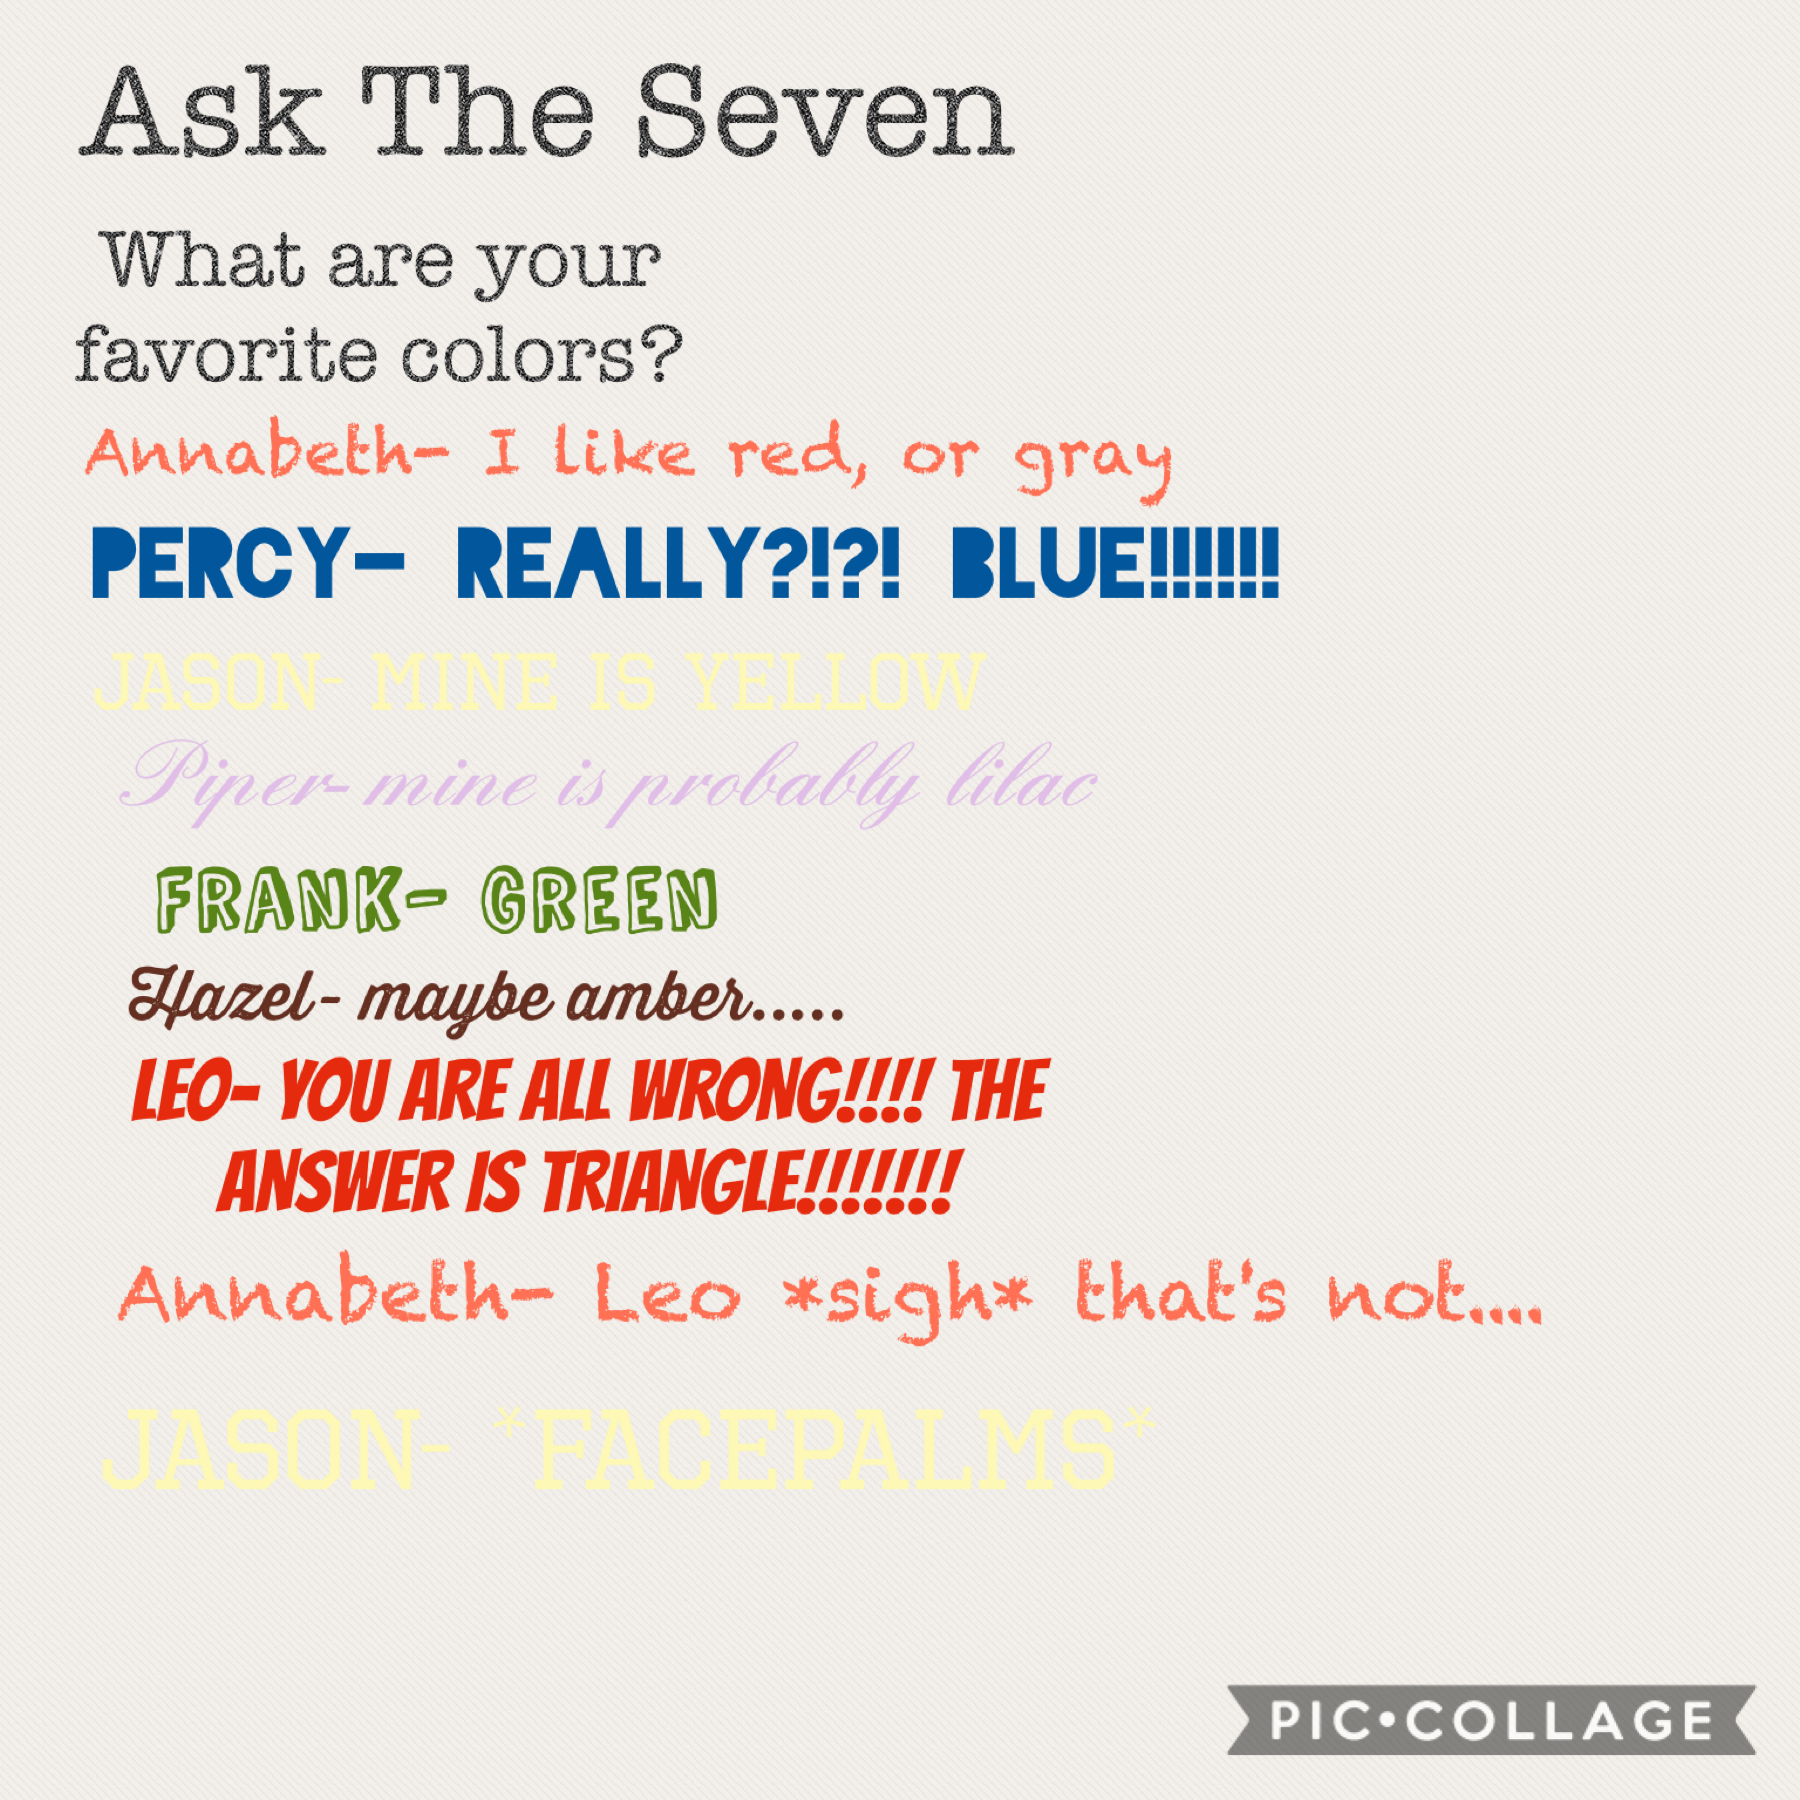 @ask_the_seven